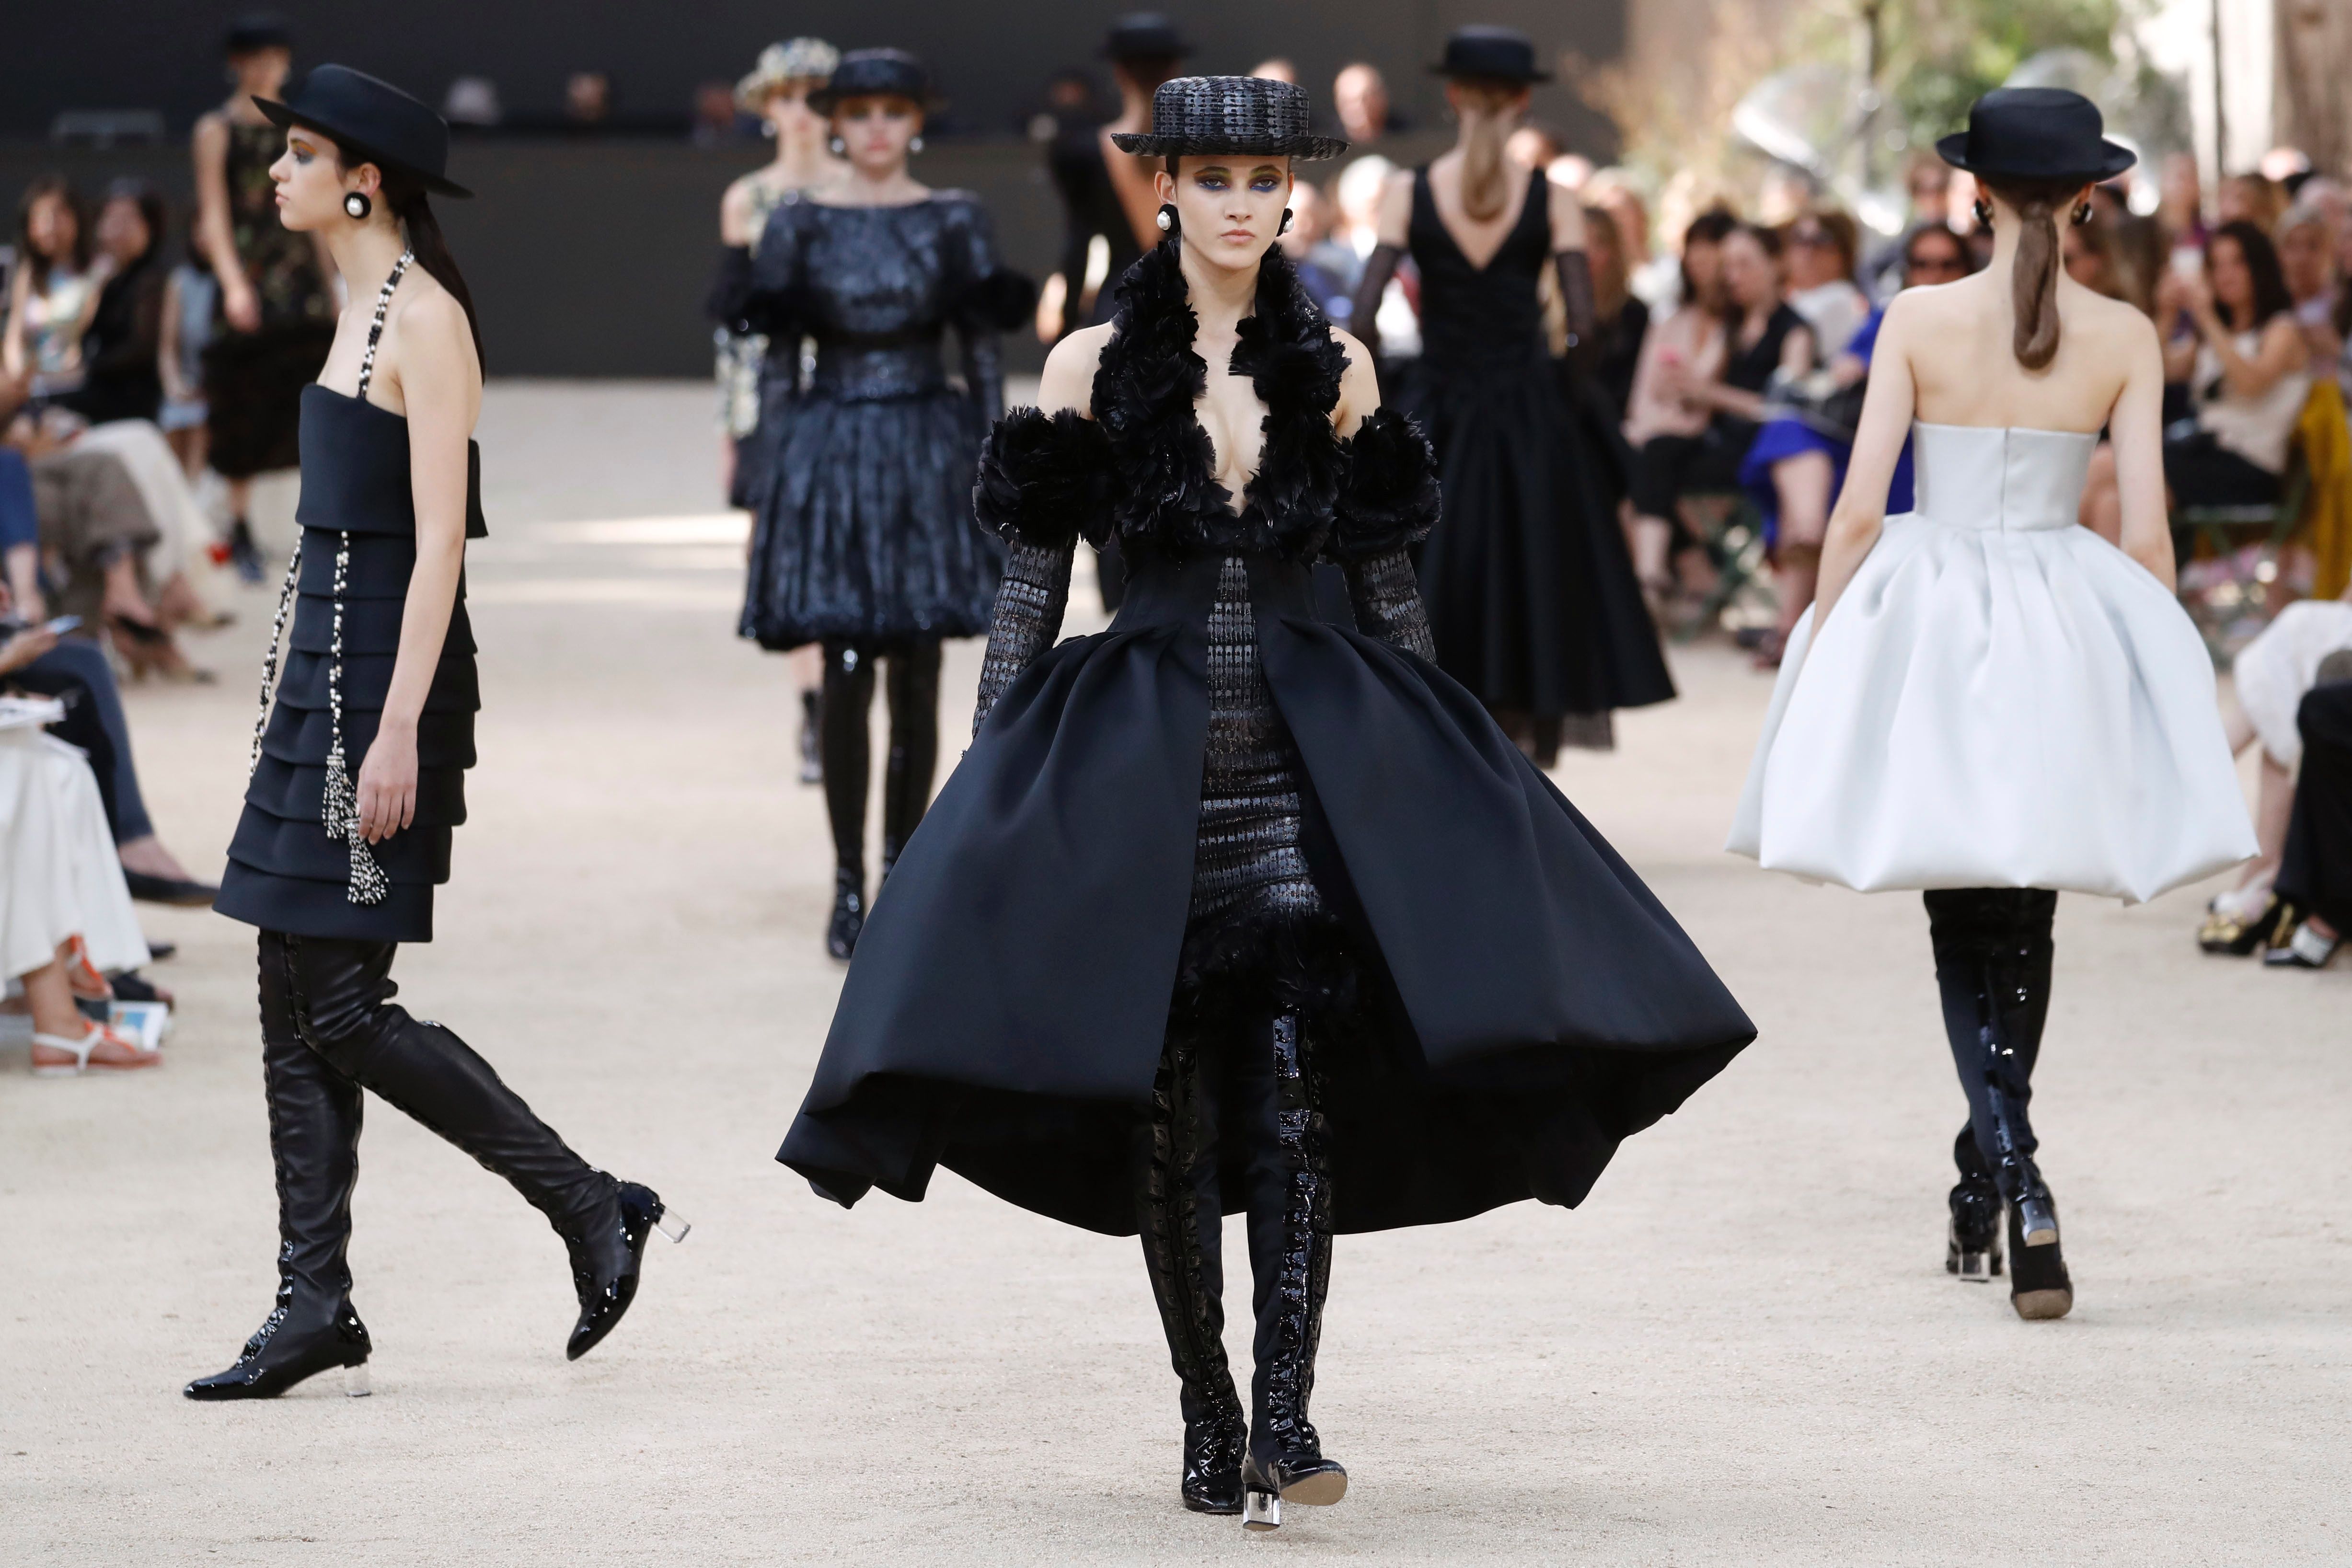 Haute couture: Chanel's 2017/2018 fall collection - New York Amsterdam News